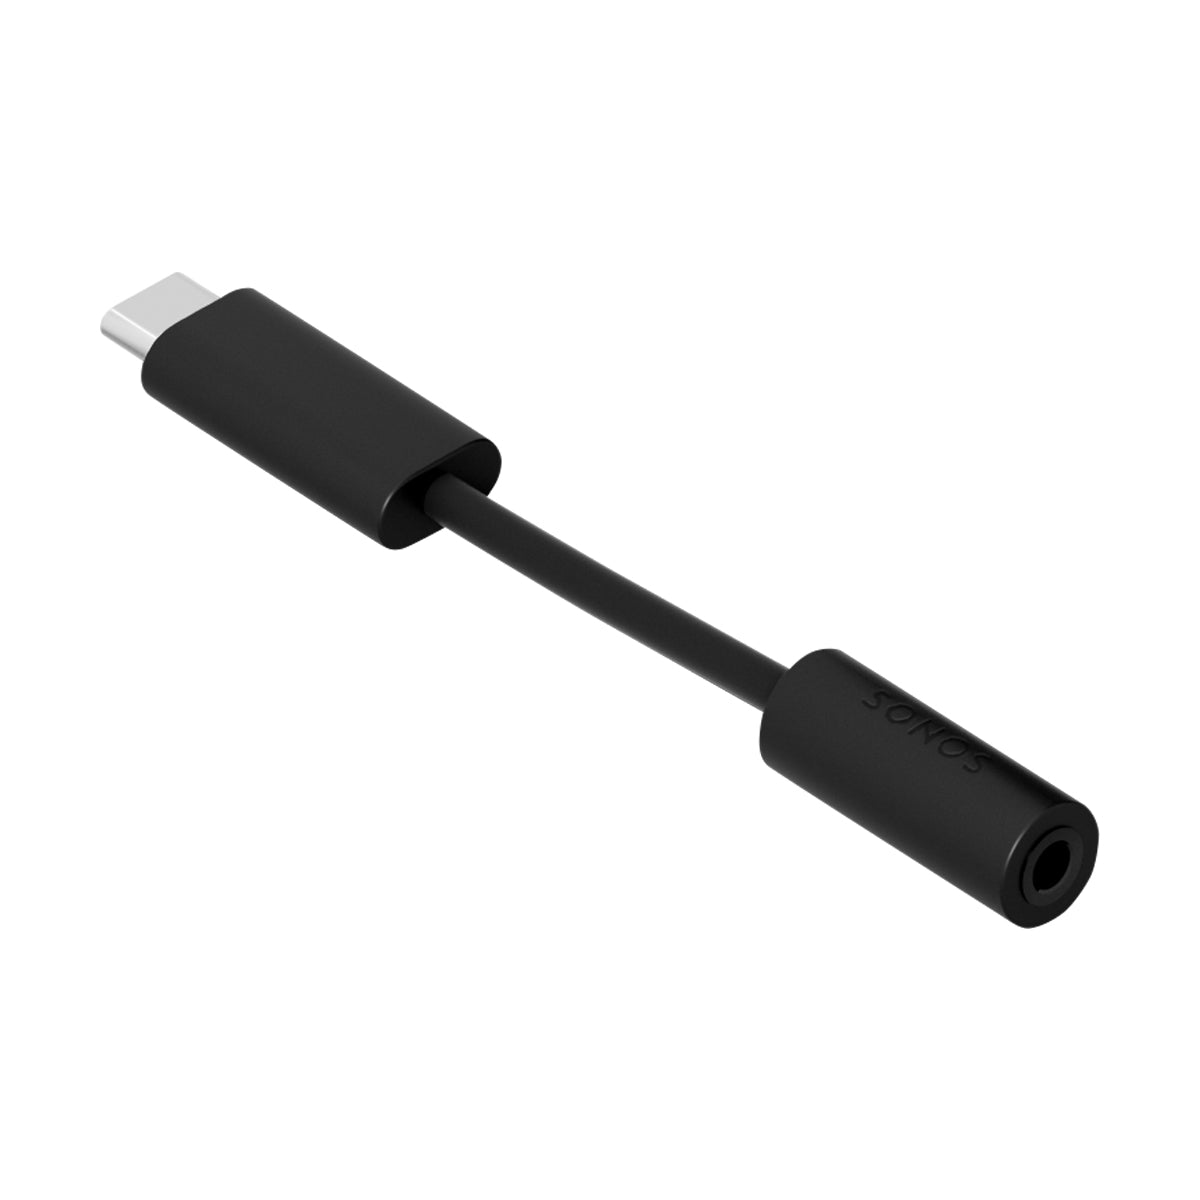 Sonos LINE-IN Adapter - Black - The Audio Experts